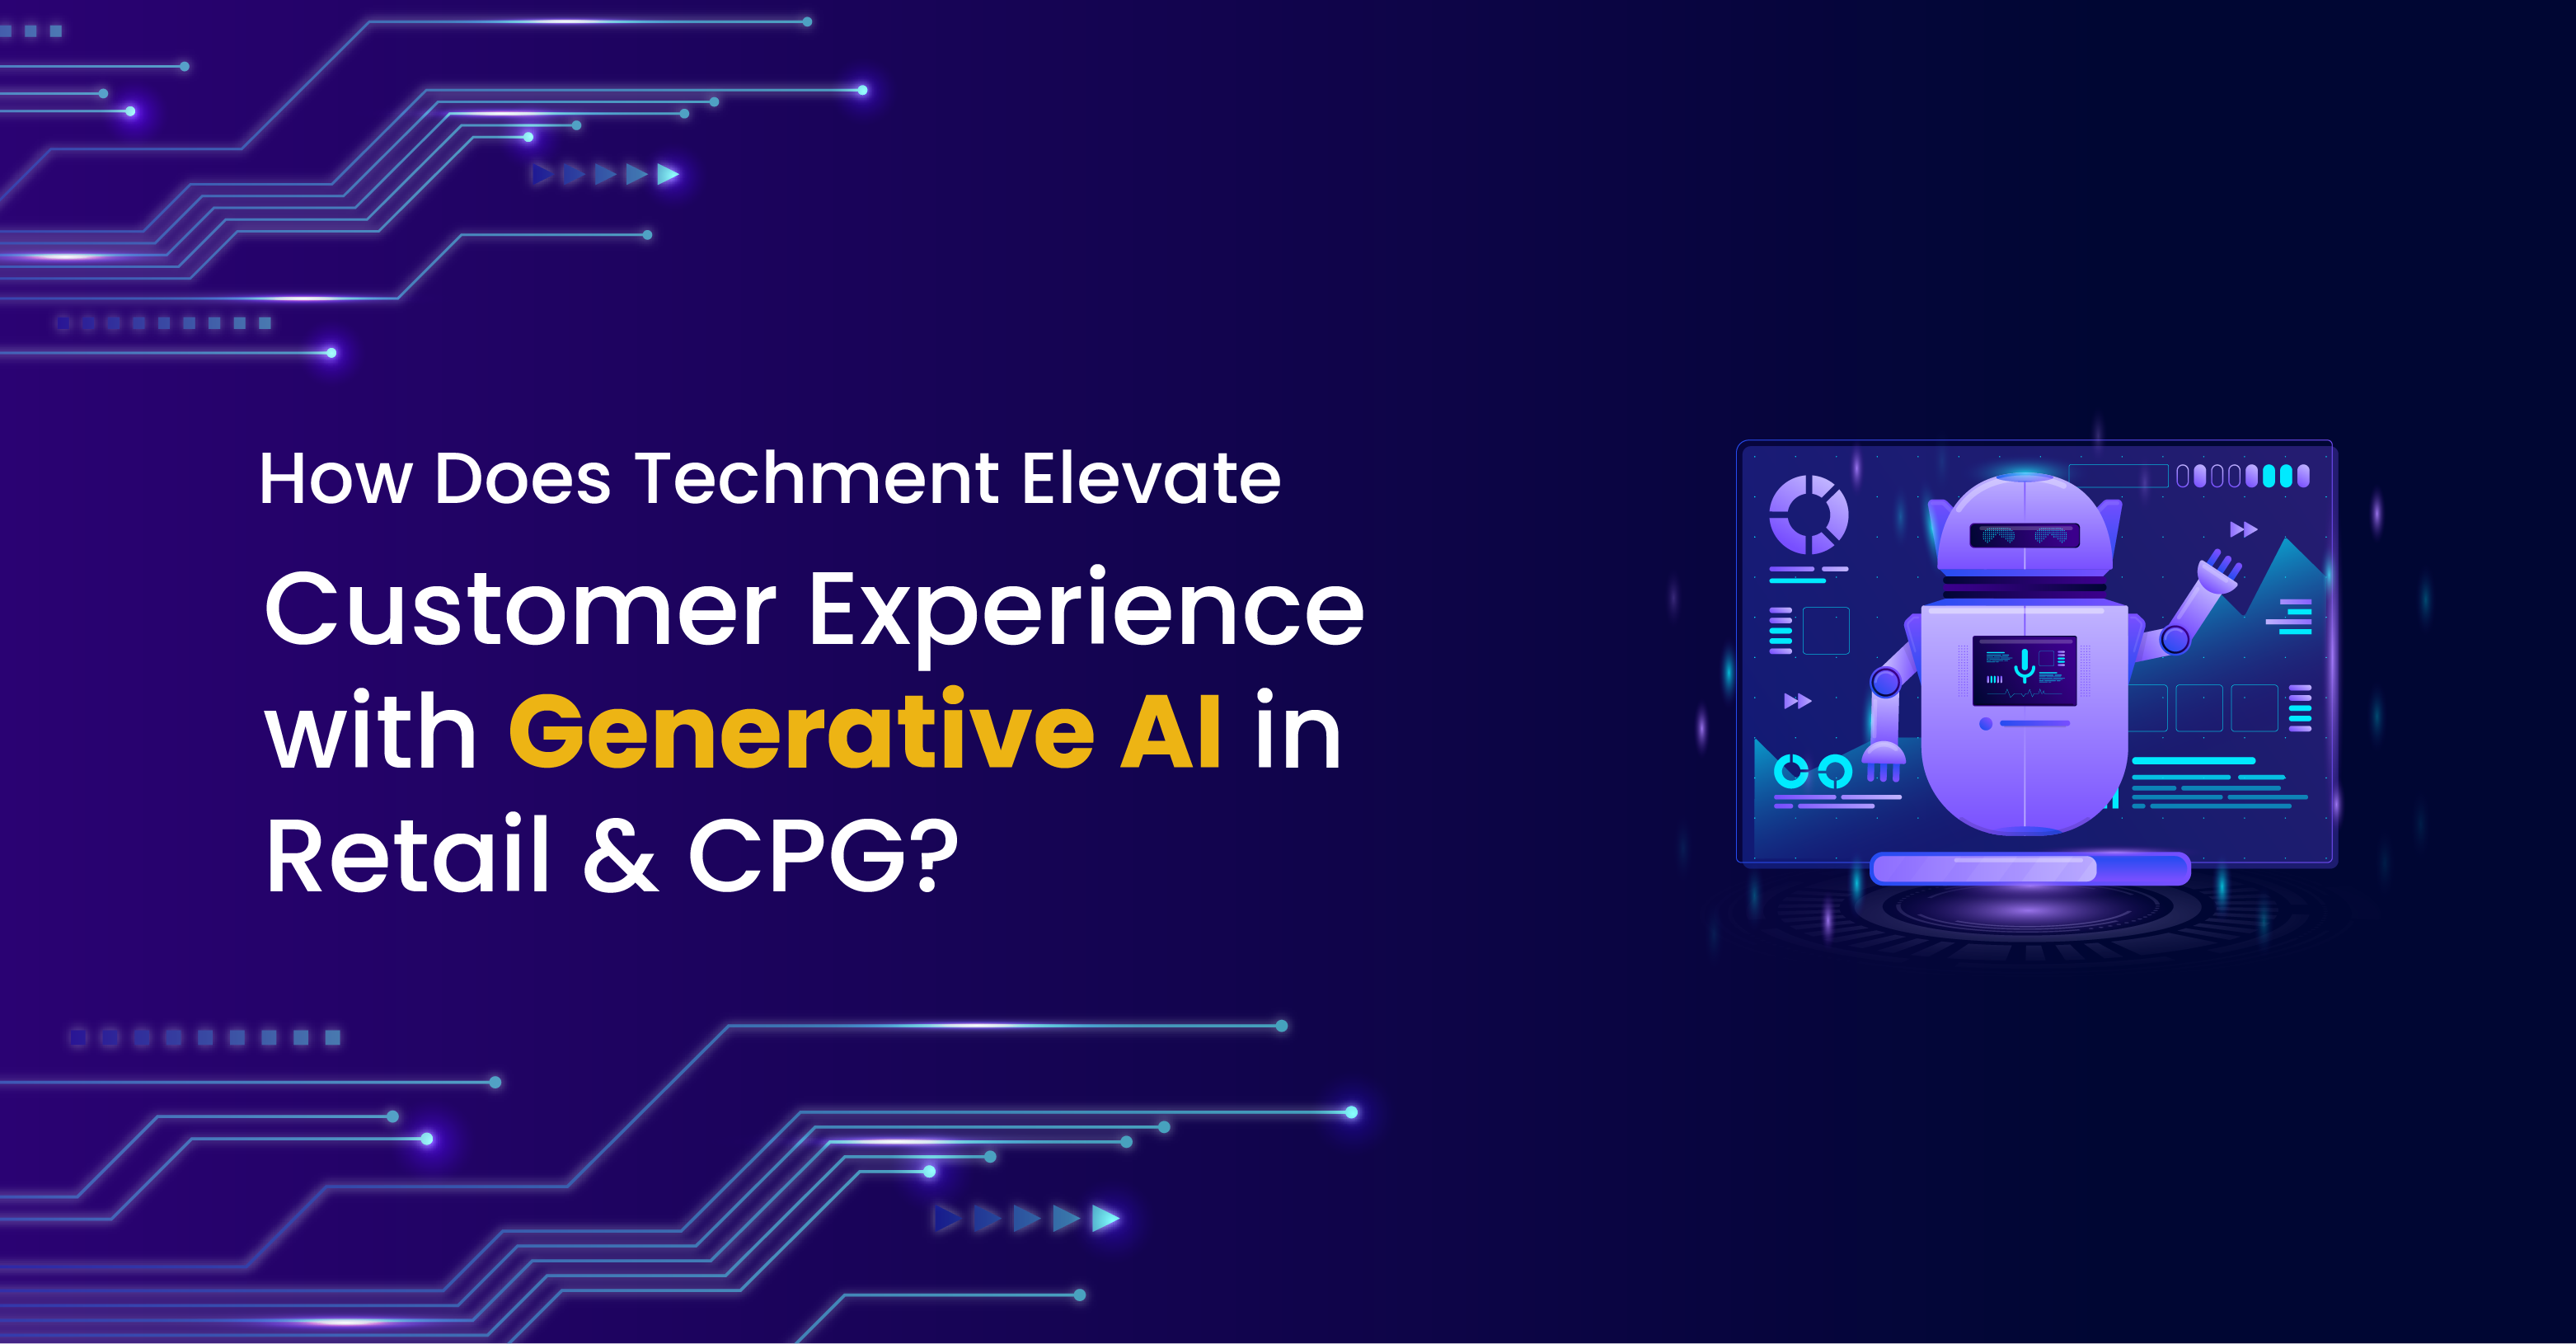 How Does Techment Elevate Customer Experience with Generative AI in Retail & CPG?